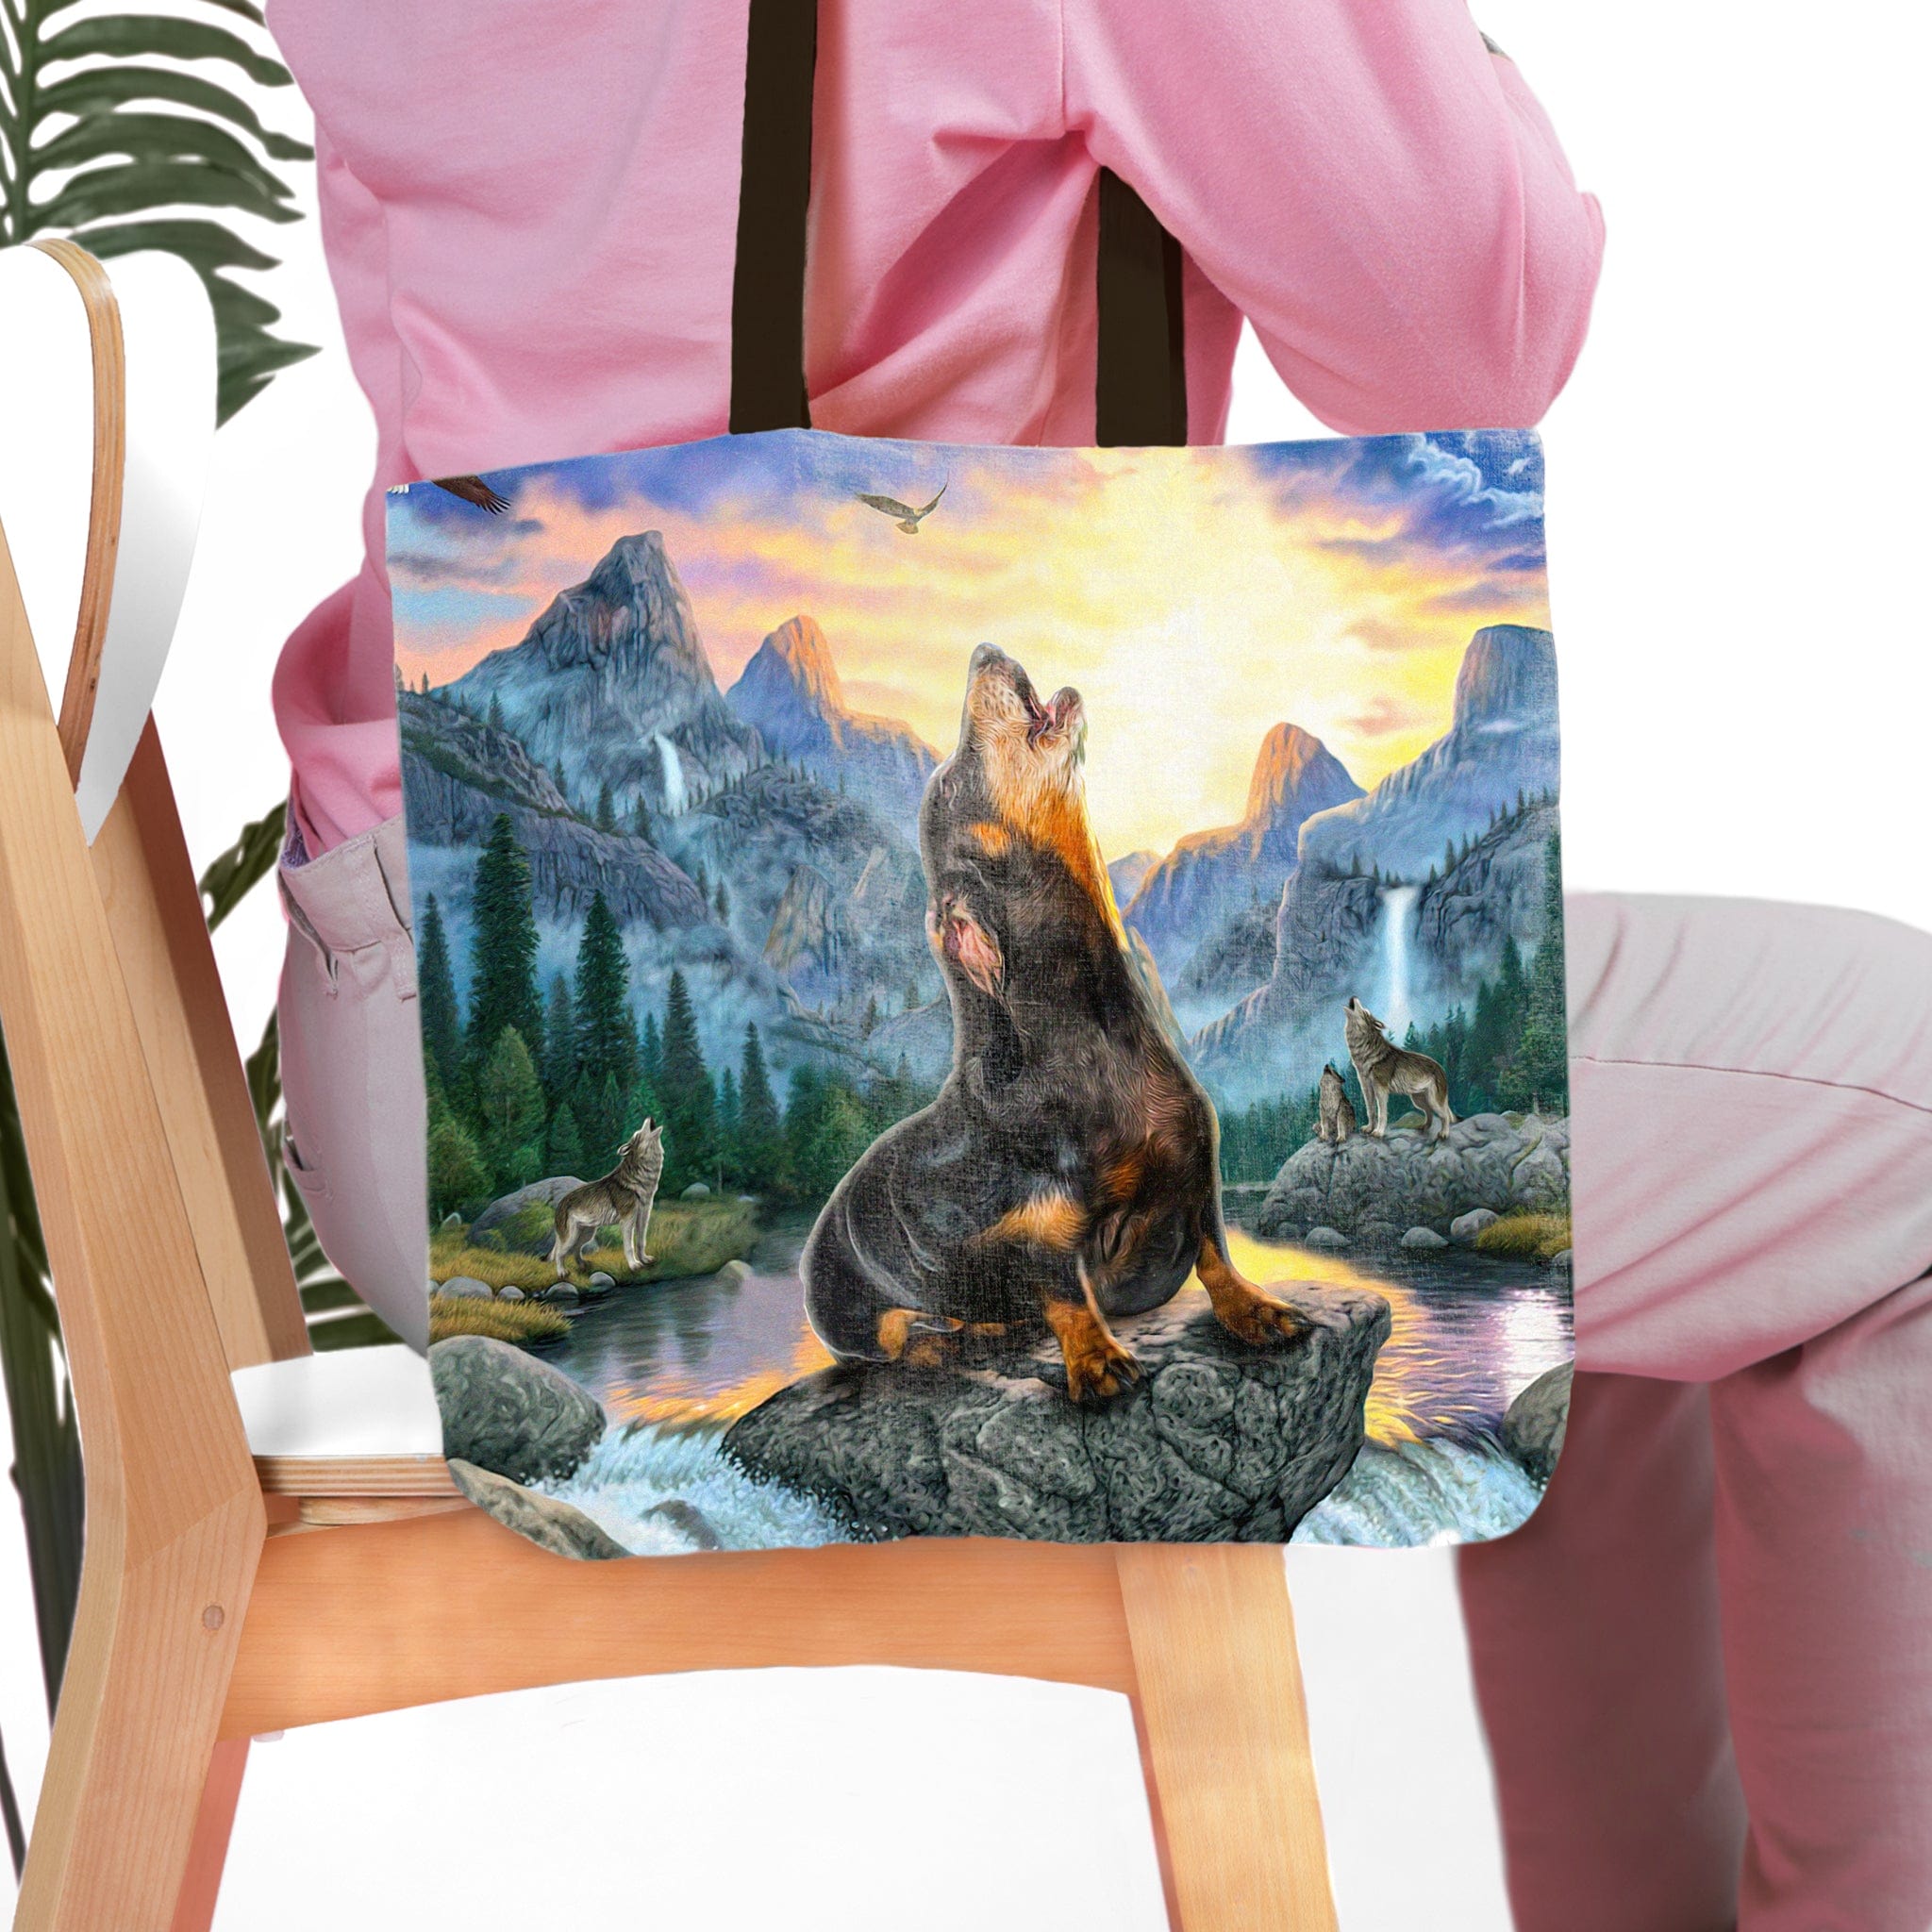 &#39;The Retro Wolf&#39; Personalized Tote Bag